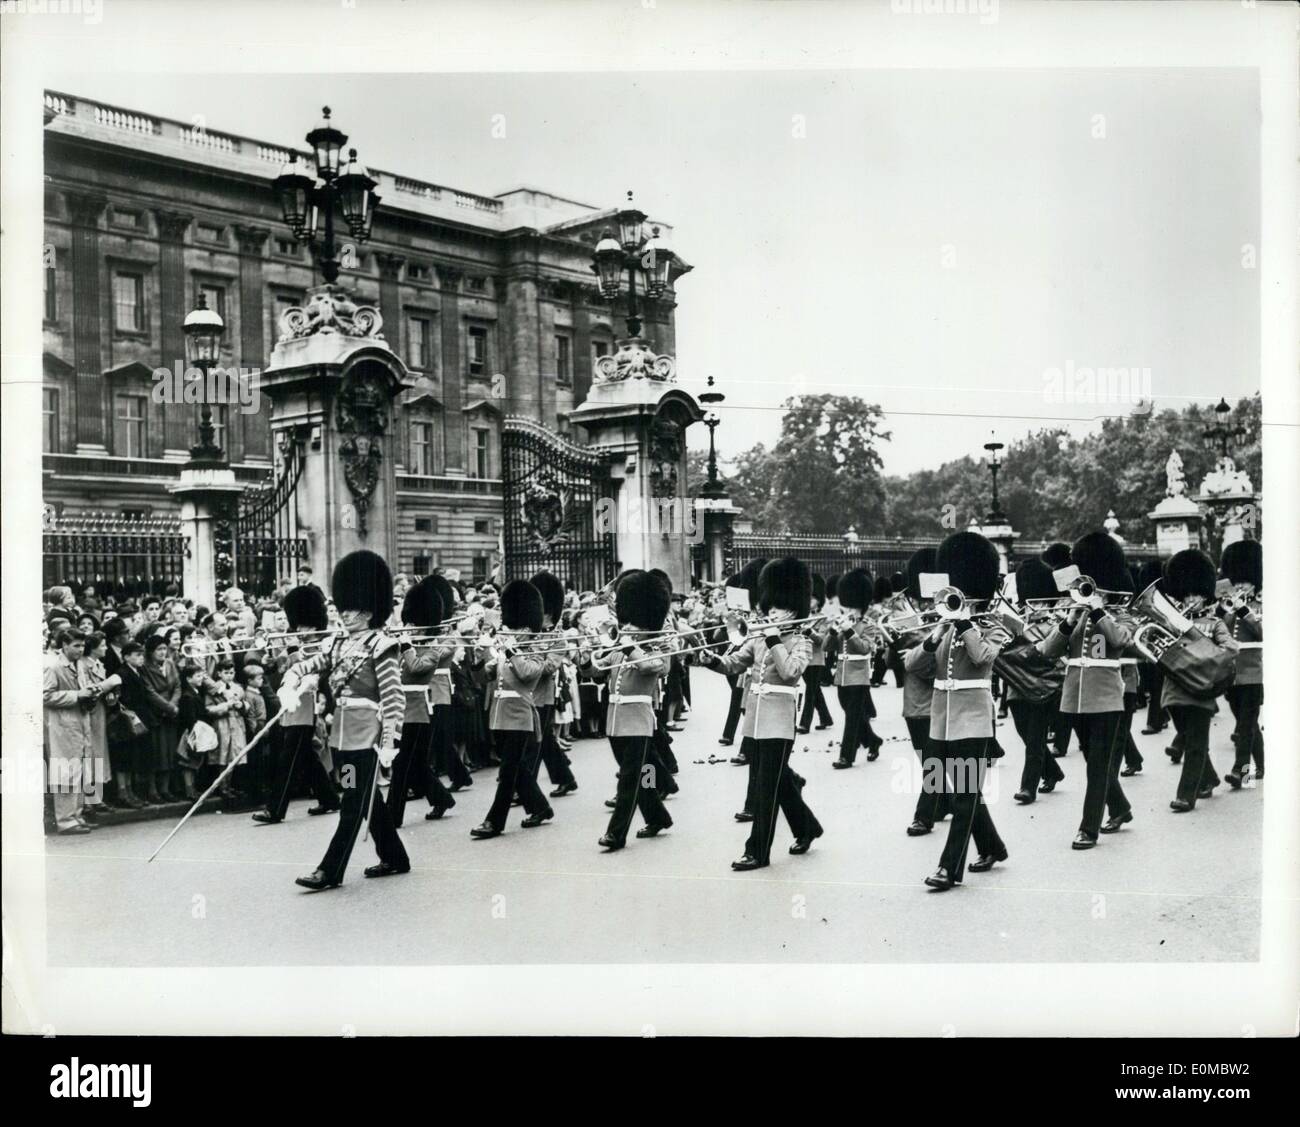 Aug. 08, 1954 - IRISH GUARDS BAND TO VISIT U.S.: Coming to the United States on September 12 is the 60-member band of the Irish Stock Photo